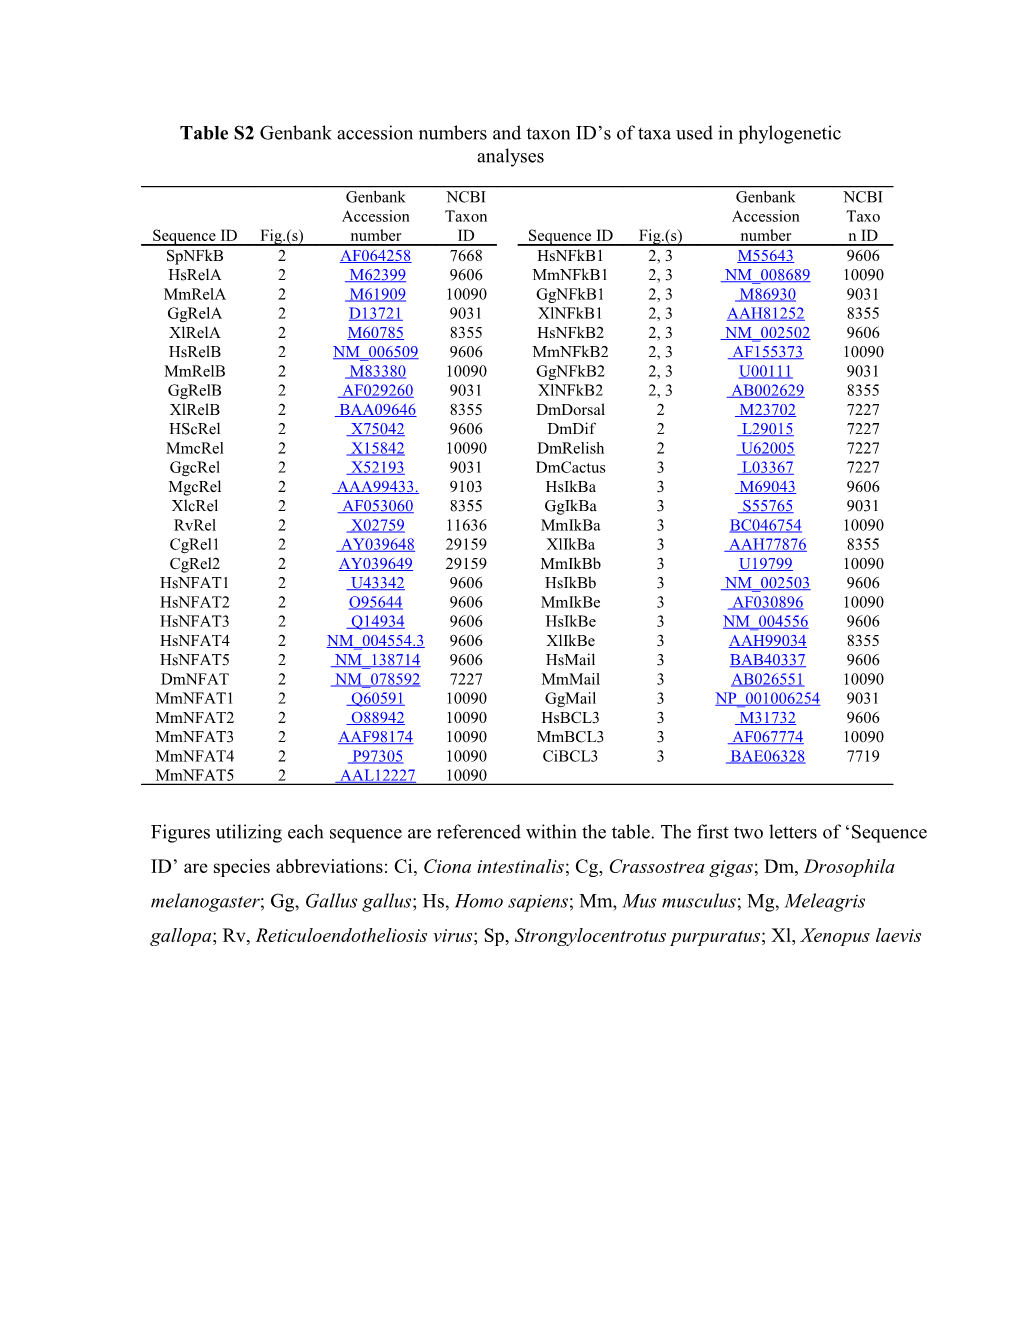 Table S2 Genbank Accession Numbers and Taxon ID S of Taxa Used in Phylogenetic Analyses